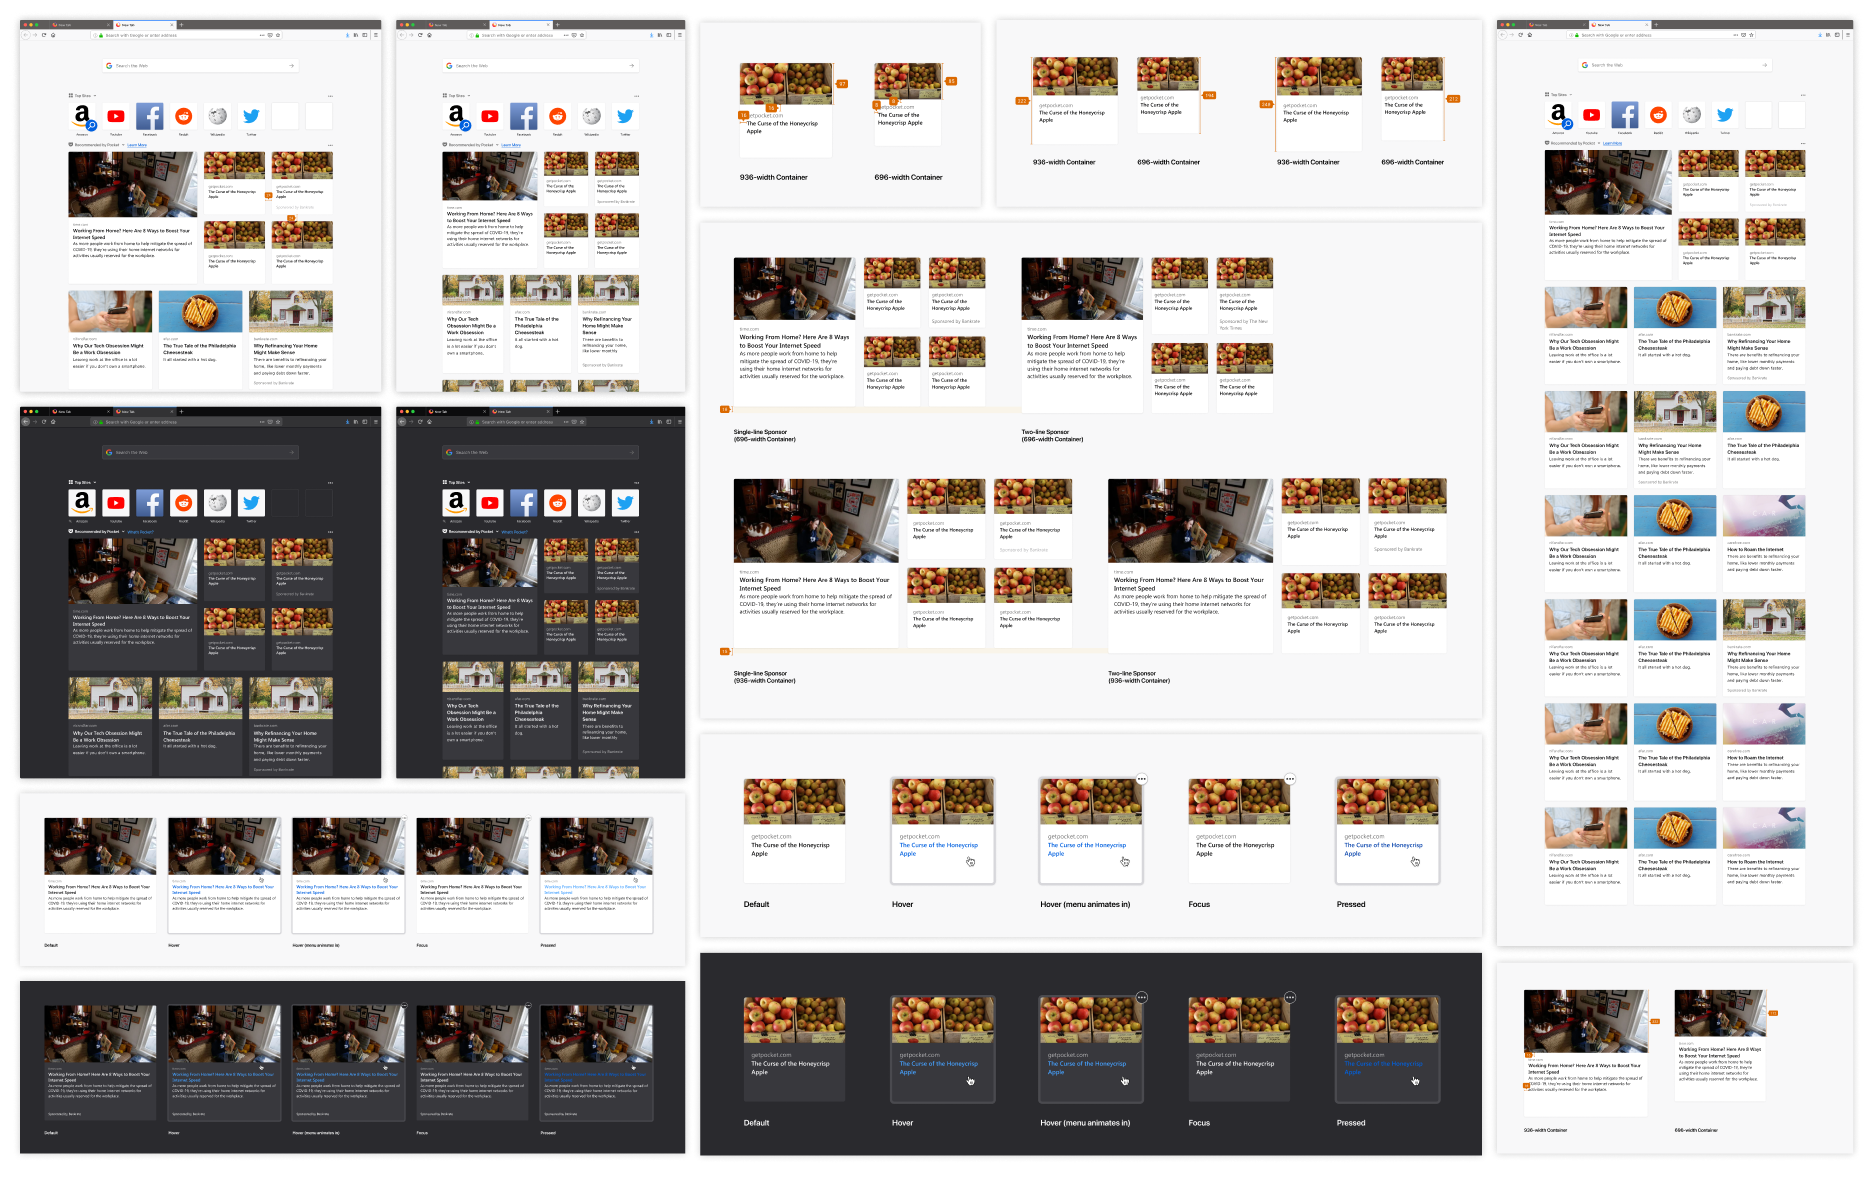 A collection of screenshots arranged in an offset layout